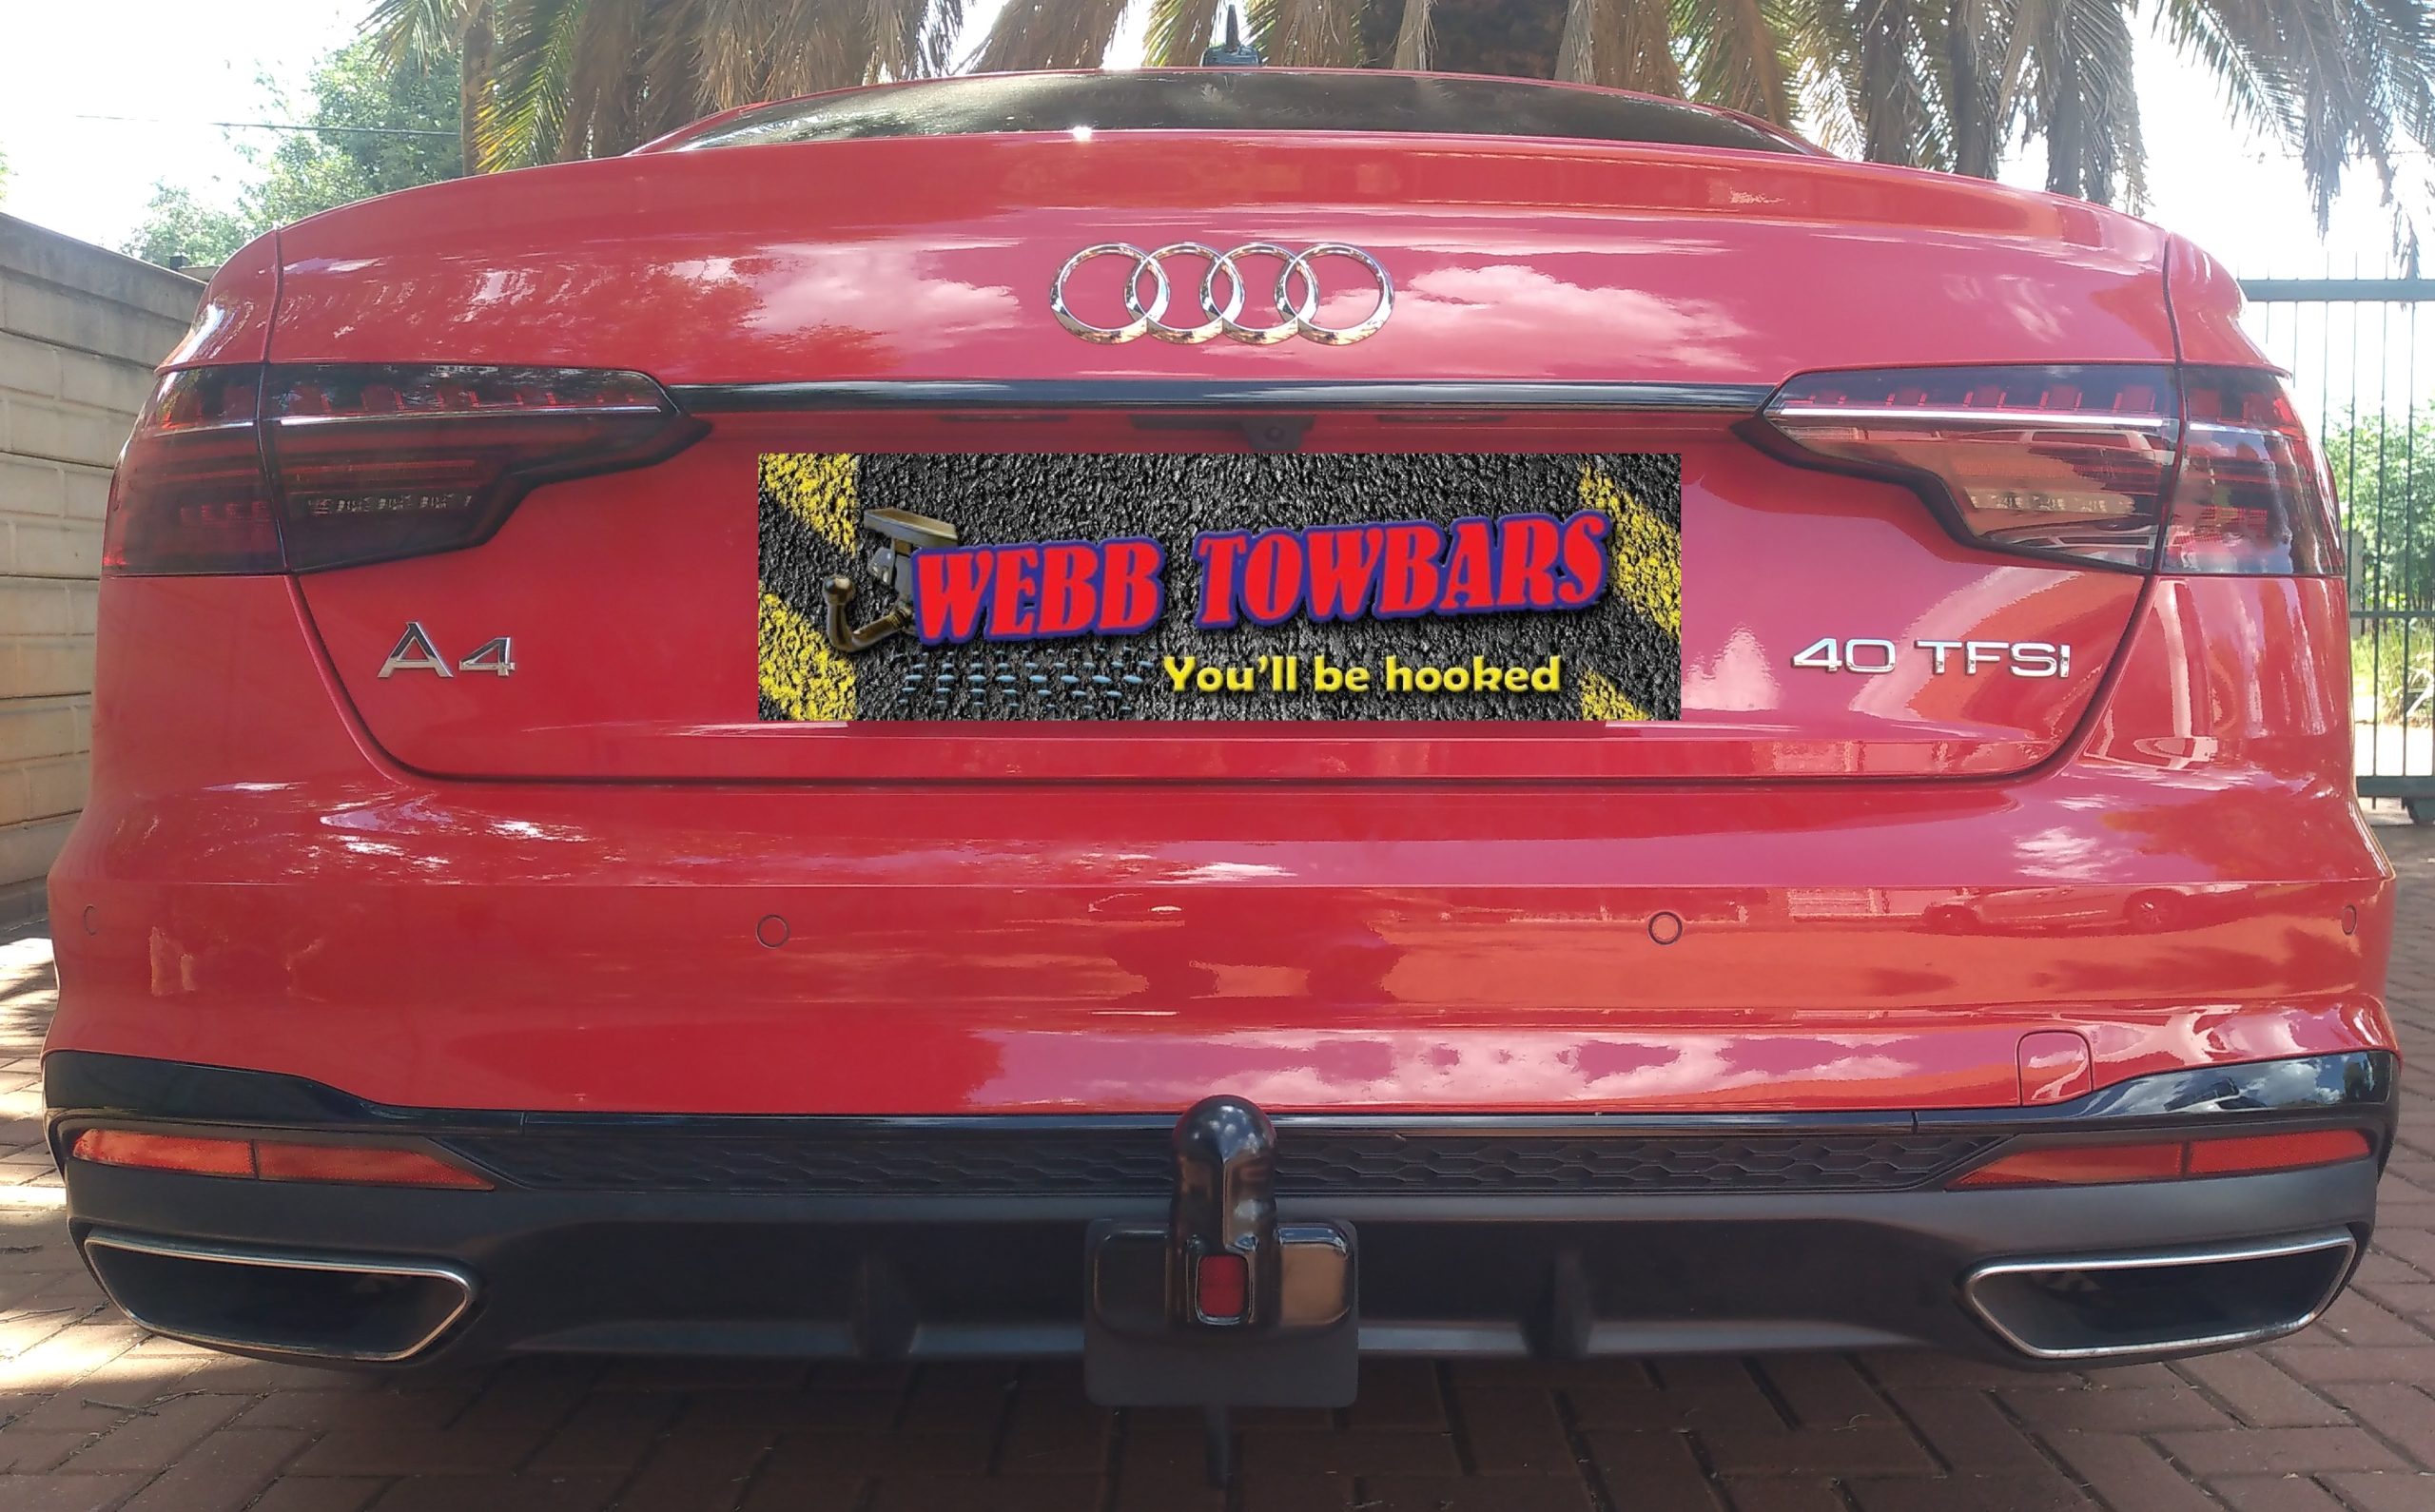 Professional Installation of Audi A4 Towbar at Webb Towbars Fitment Centre